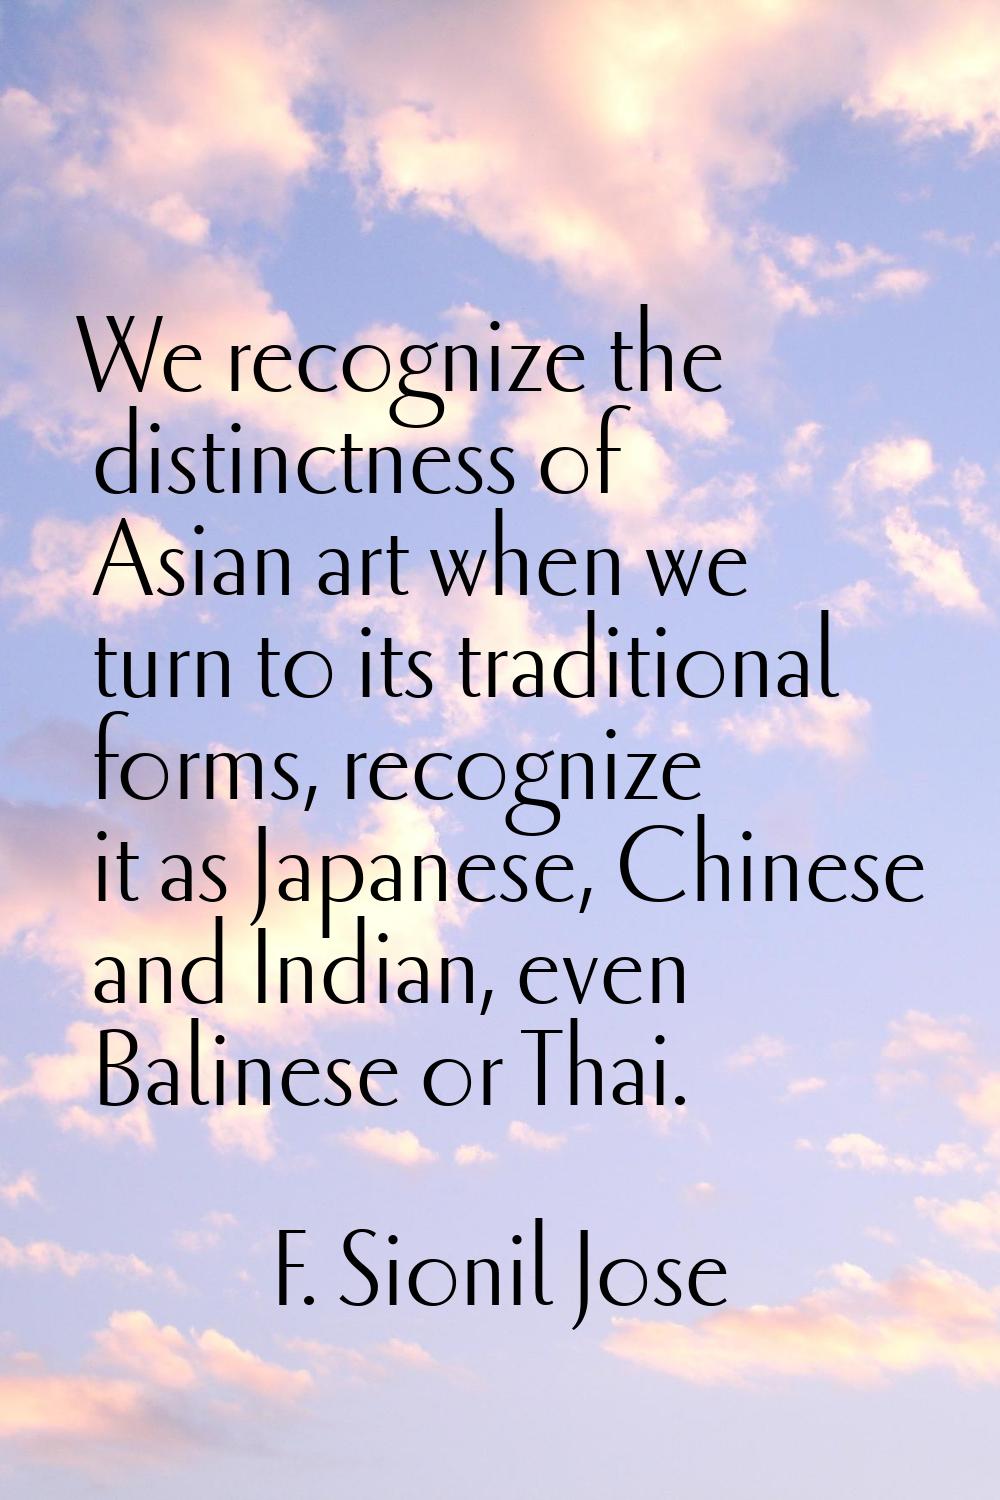 We recognize the distinctness of Asian art when we turn to its traditional forms, recognize it as J